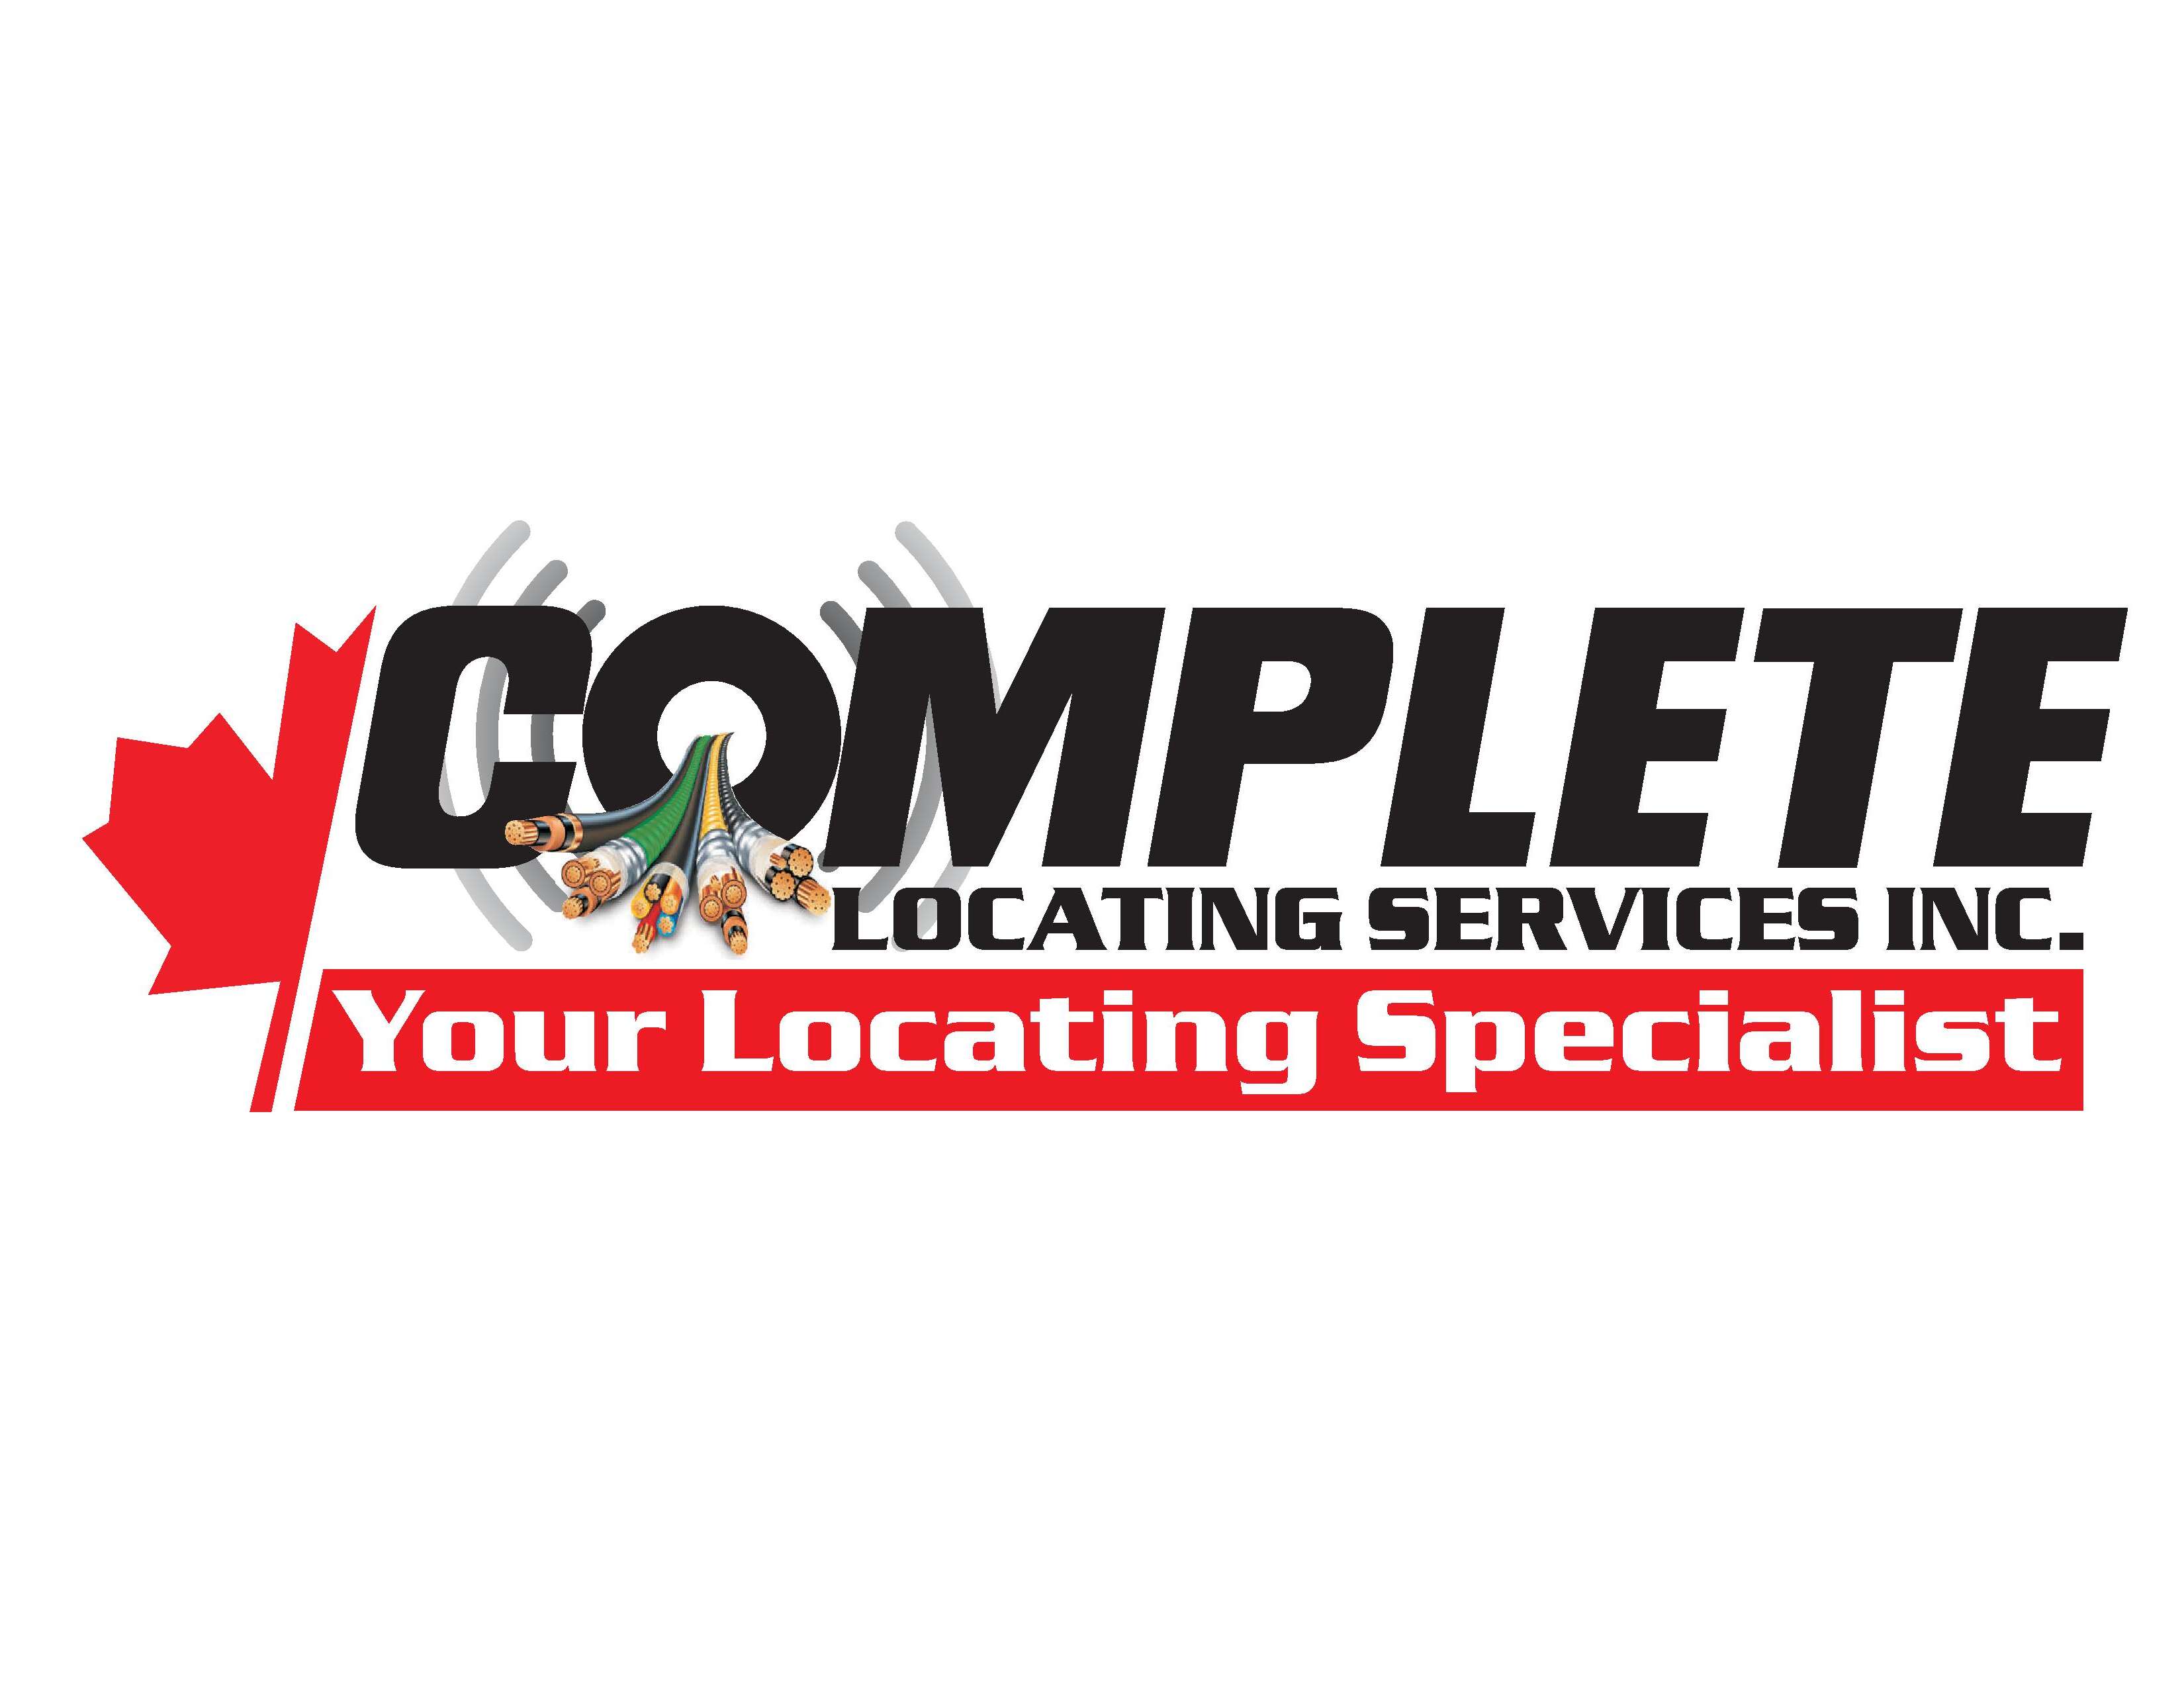 Complete Locating Services Inc.